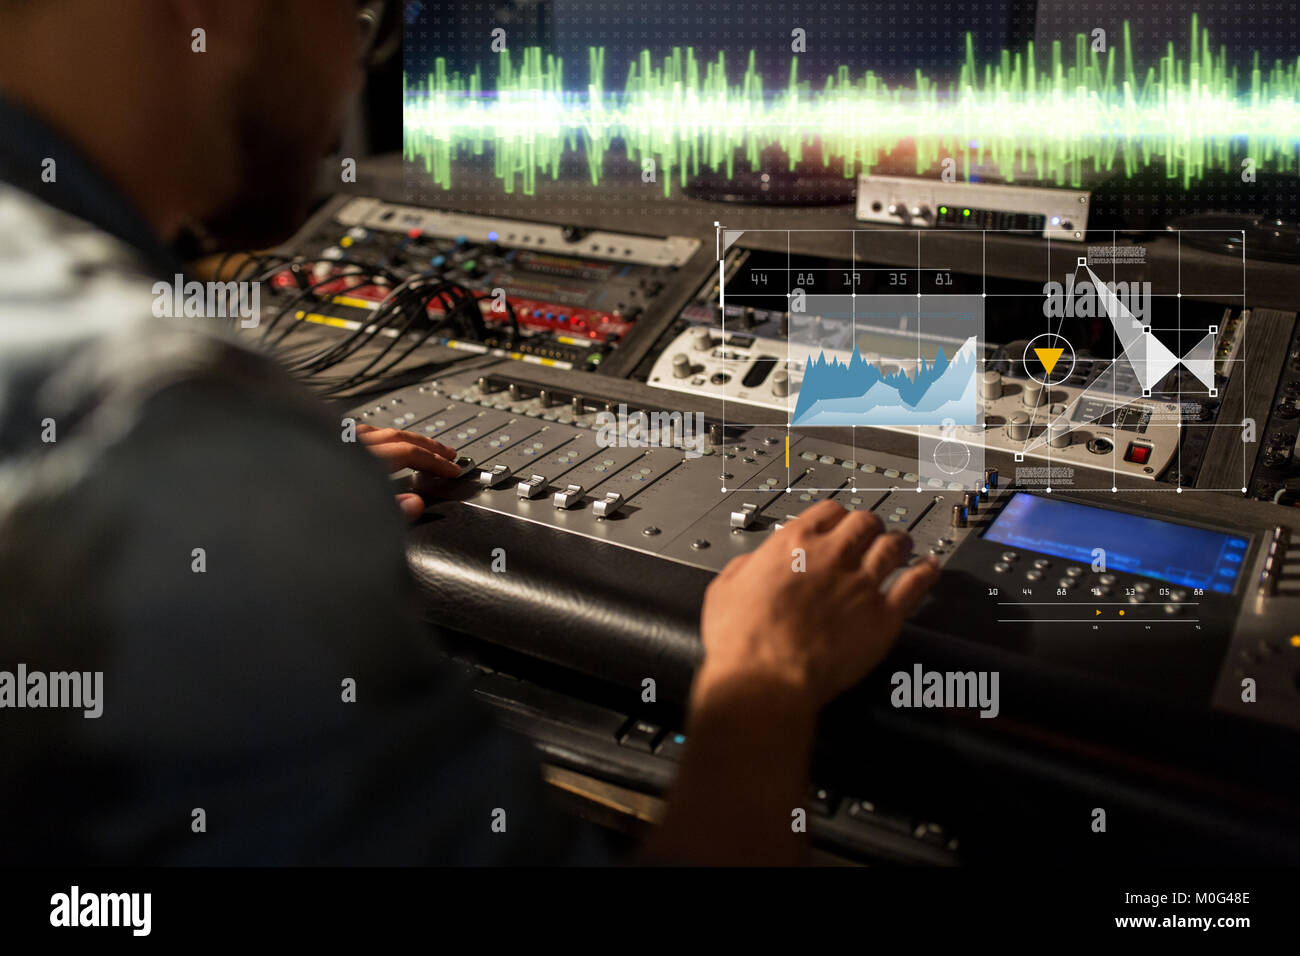 sound engineer at recording studio mixing console Stock Photo